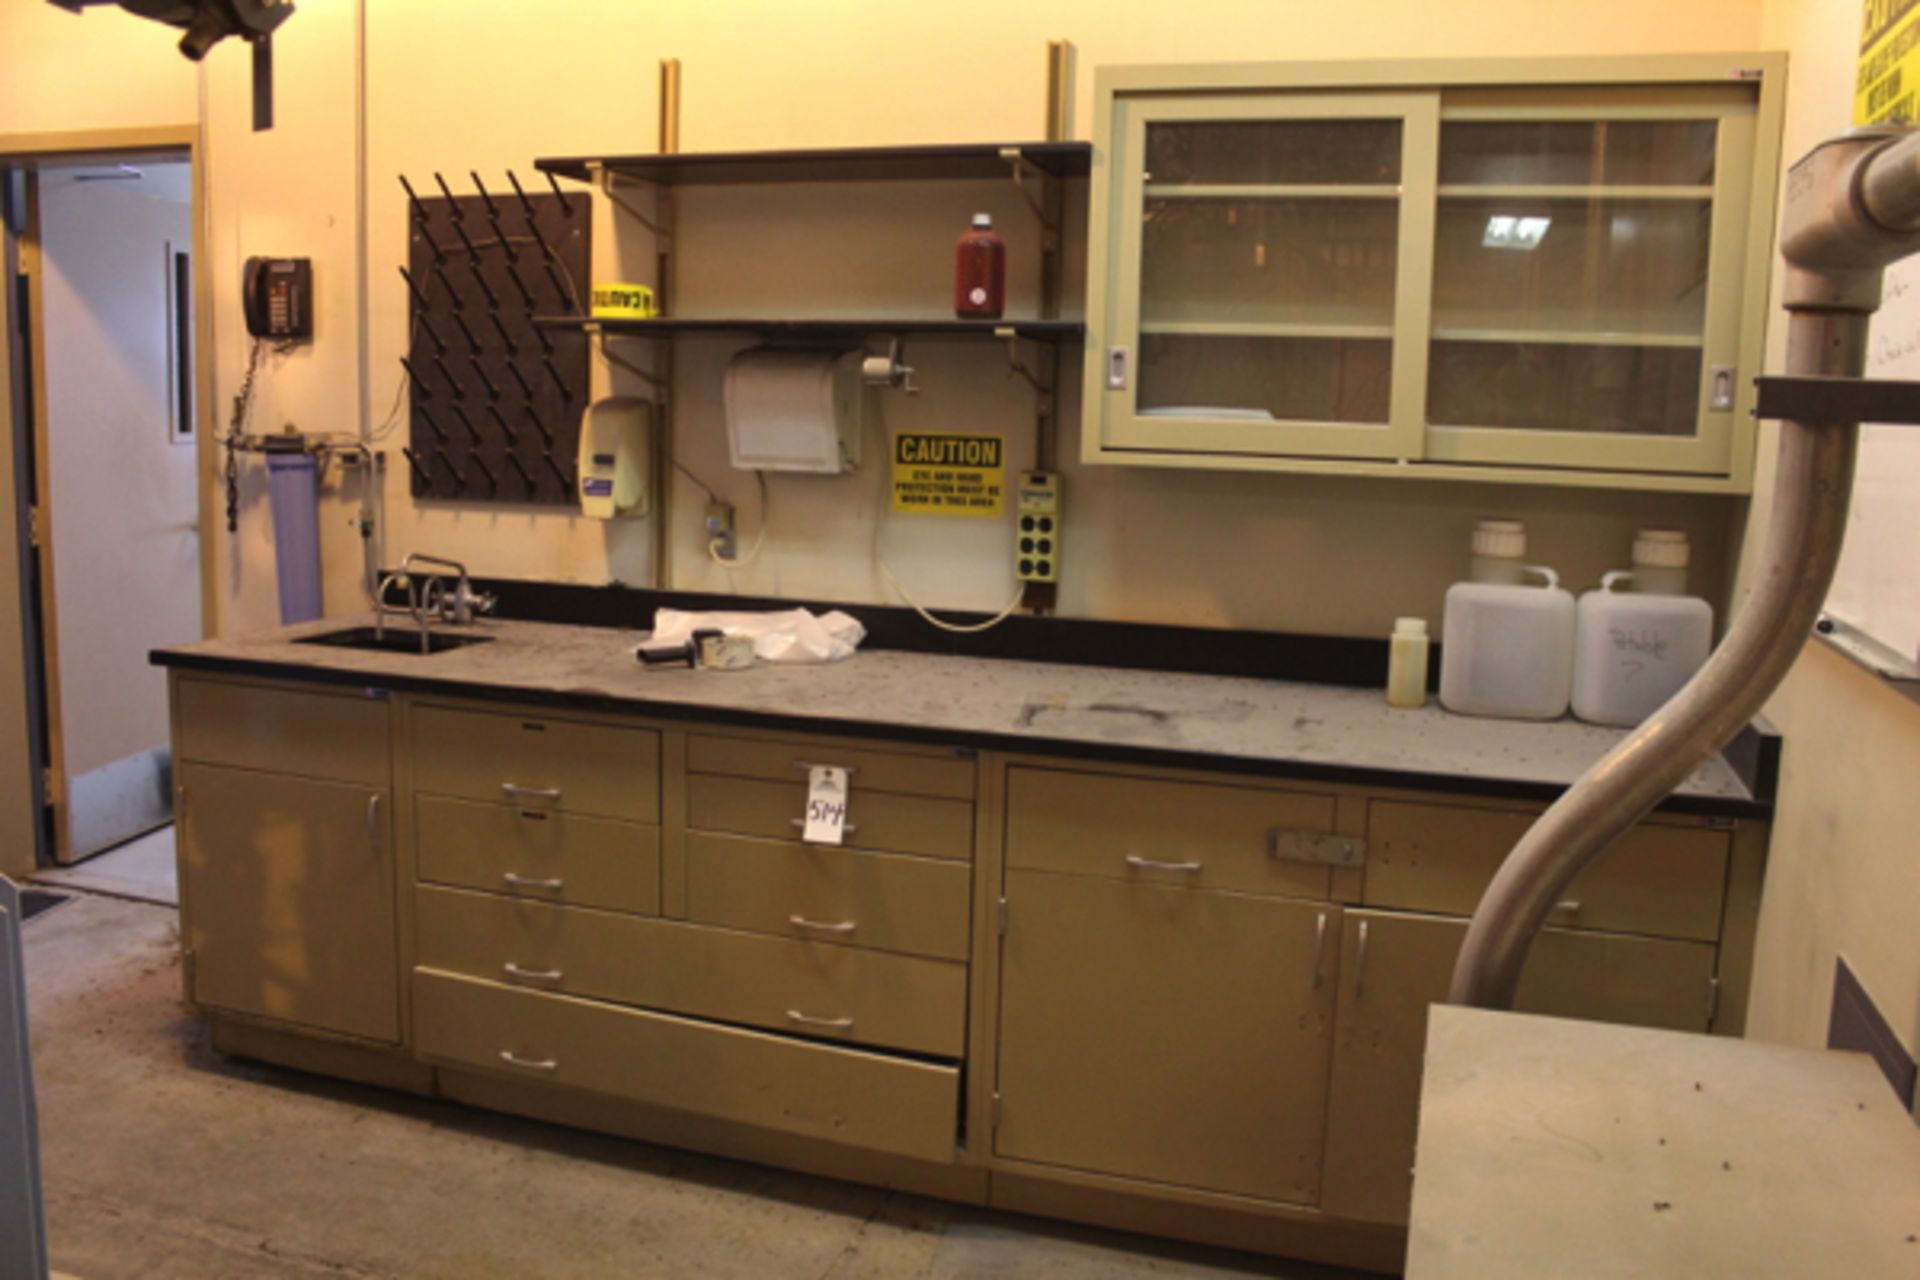 Lot of Laboratory Cabinets | Location: Administration Building